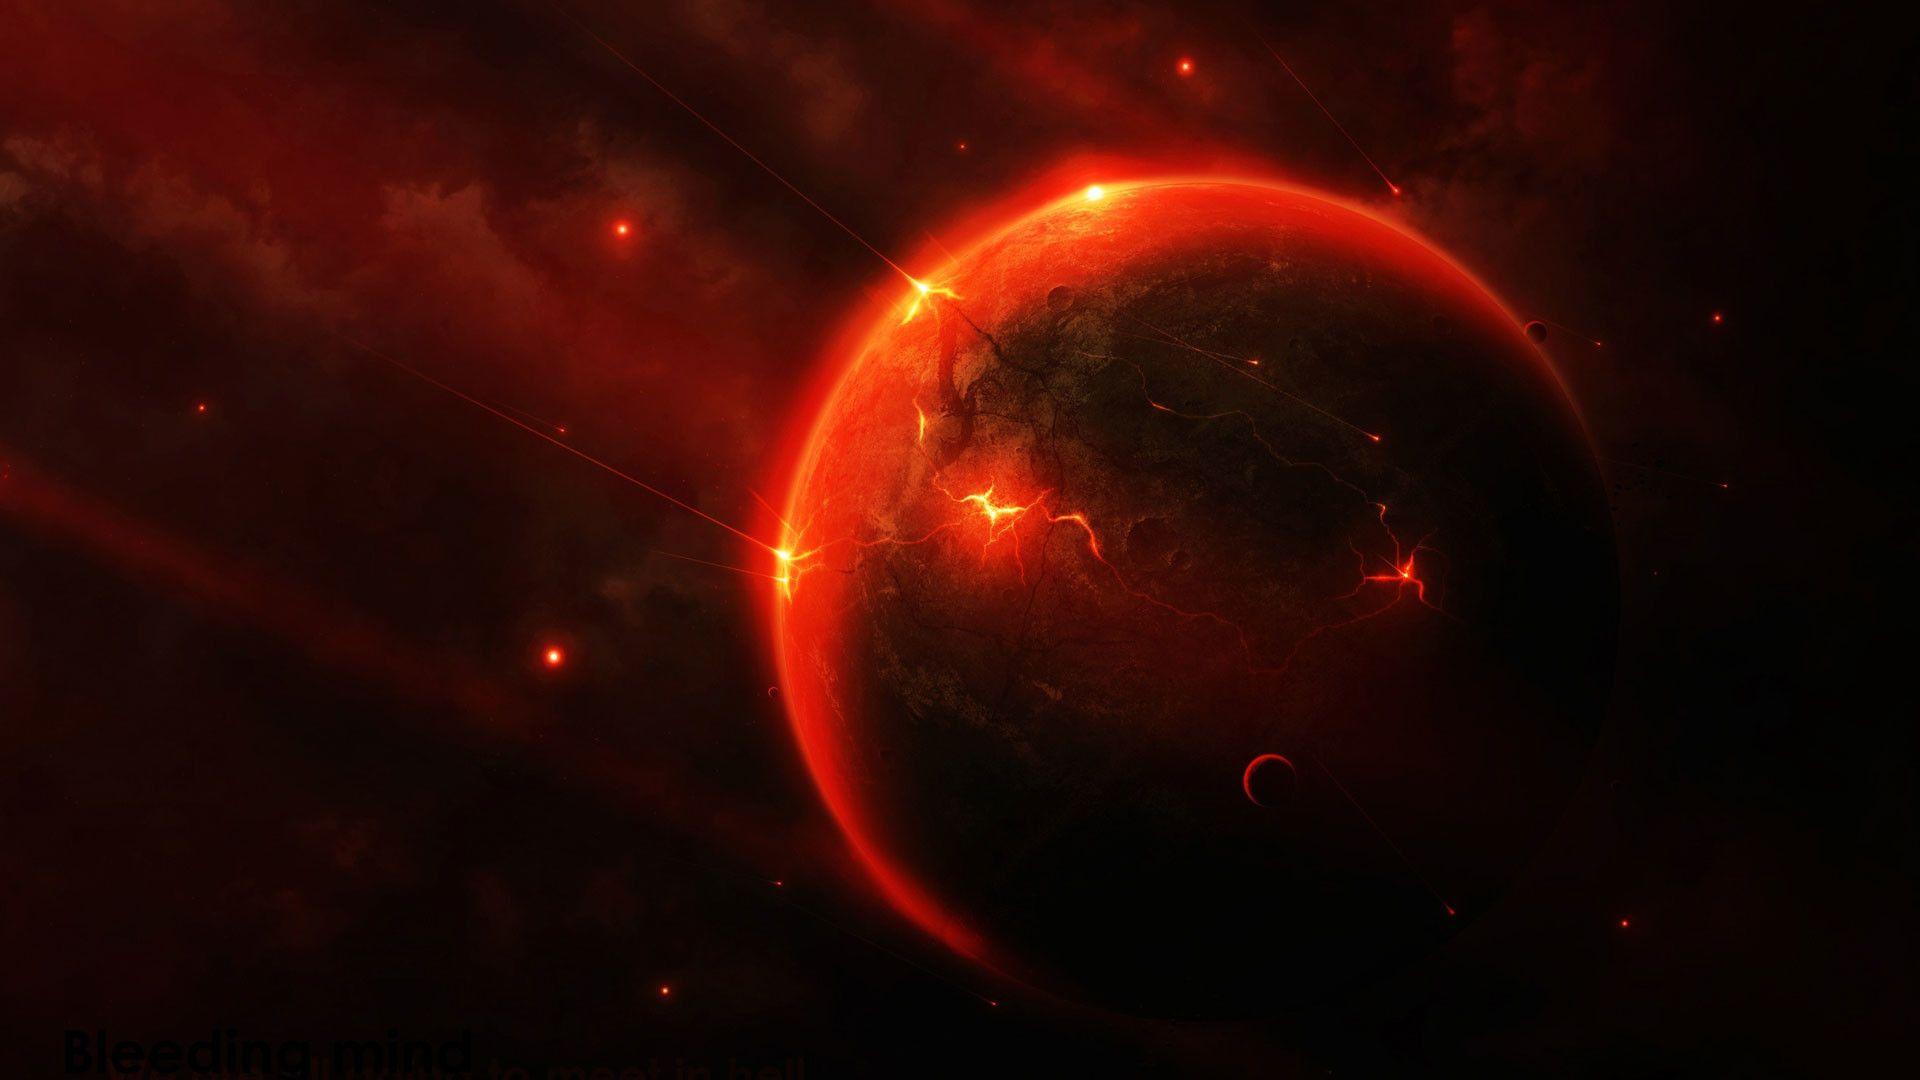 Black and Red Space HD Wallpapers - Top Free Black and Red Space HD